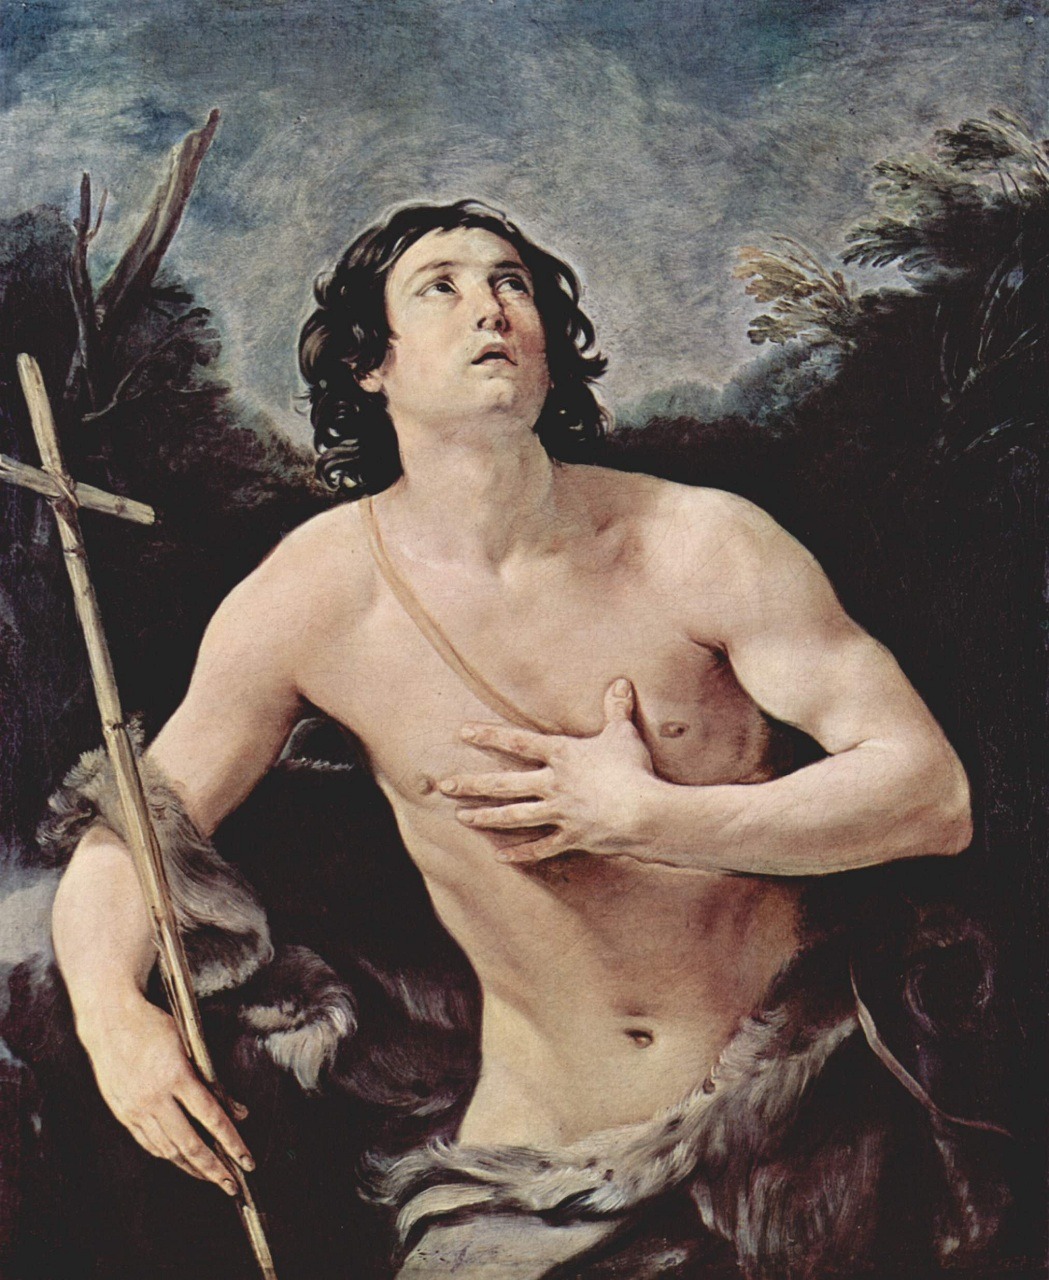 St. Sebastian, St. John the Baptist and an Angel all by Guido Reni. [More pictures